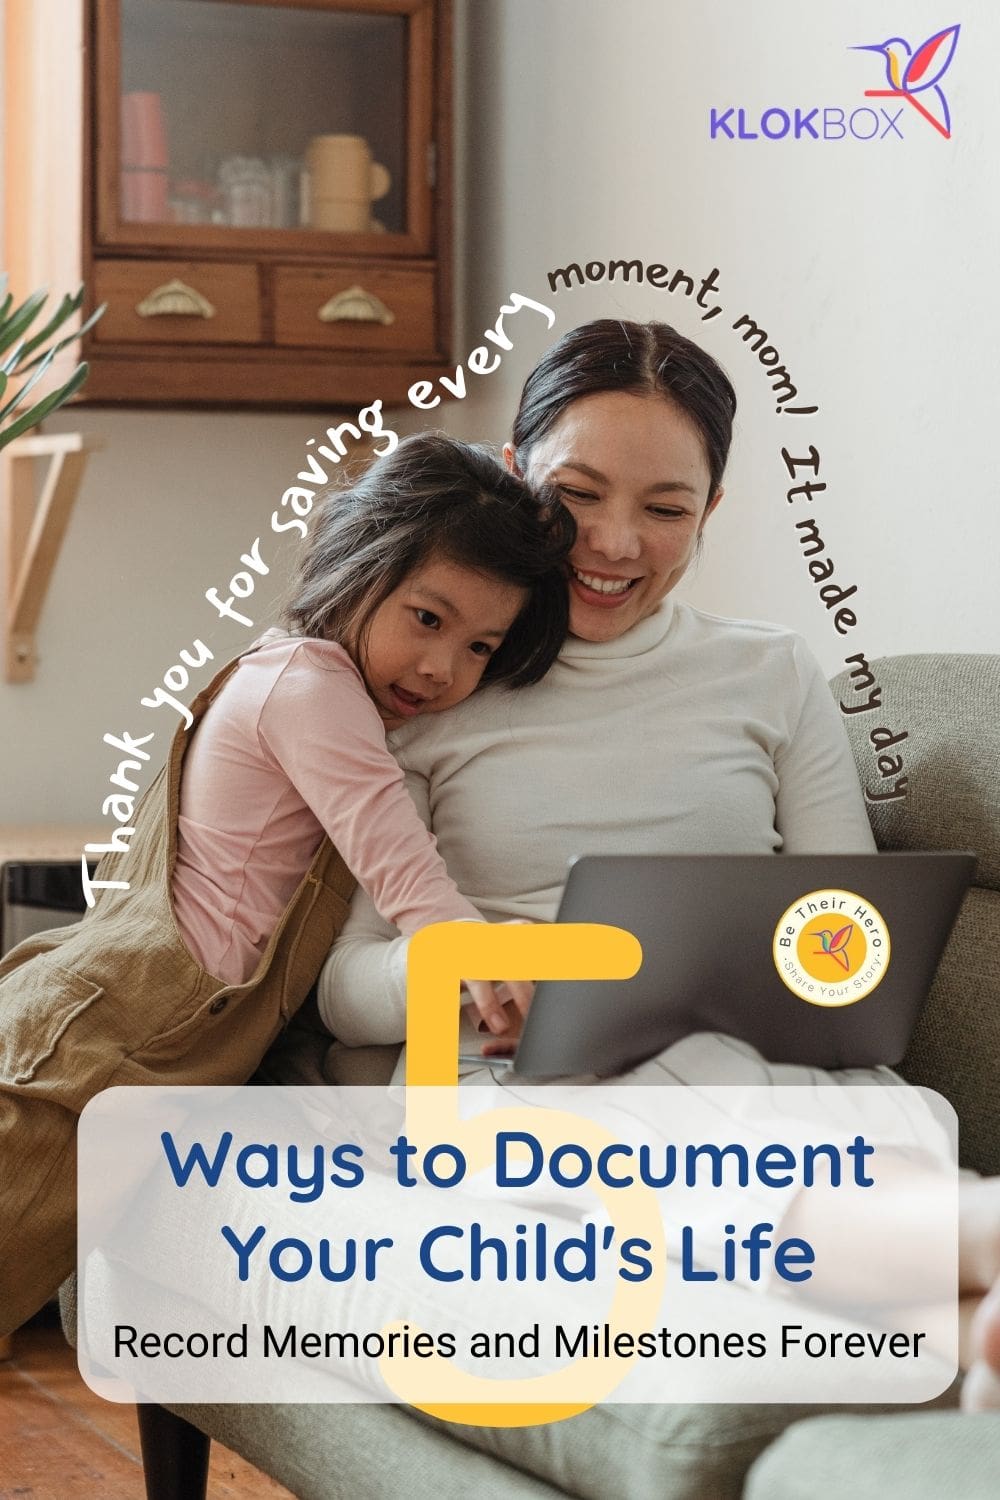 5 Ways to Document Your Child's Life - Record Memories and Milestones Forever